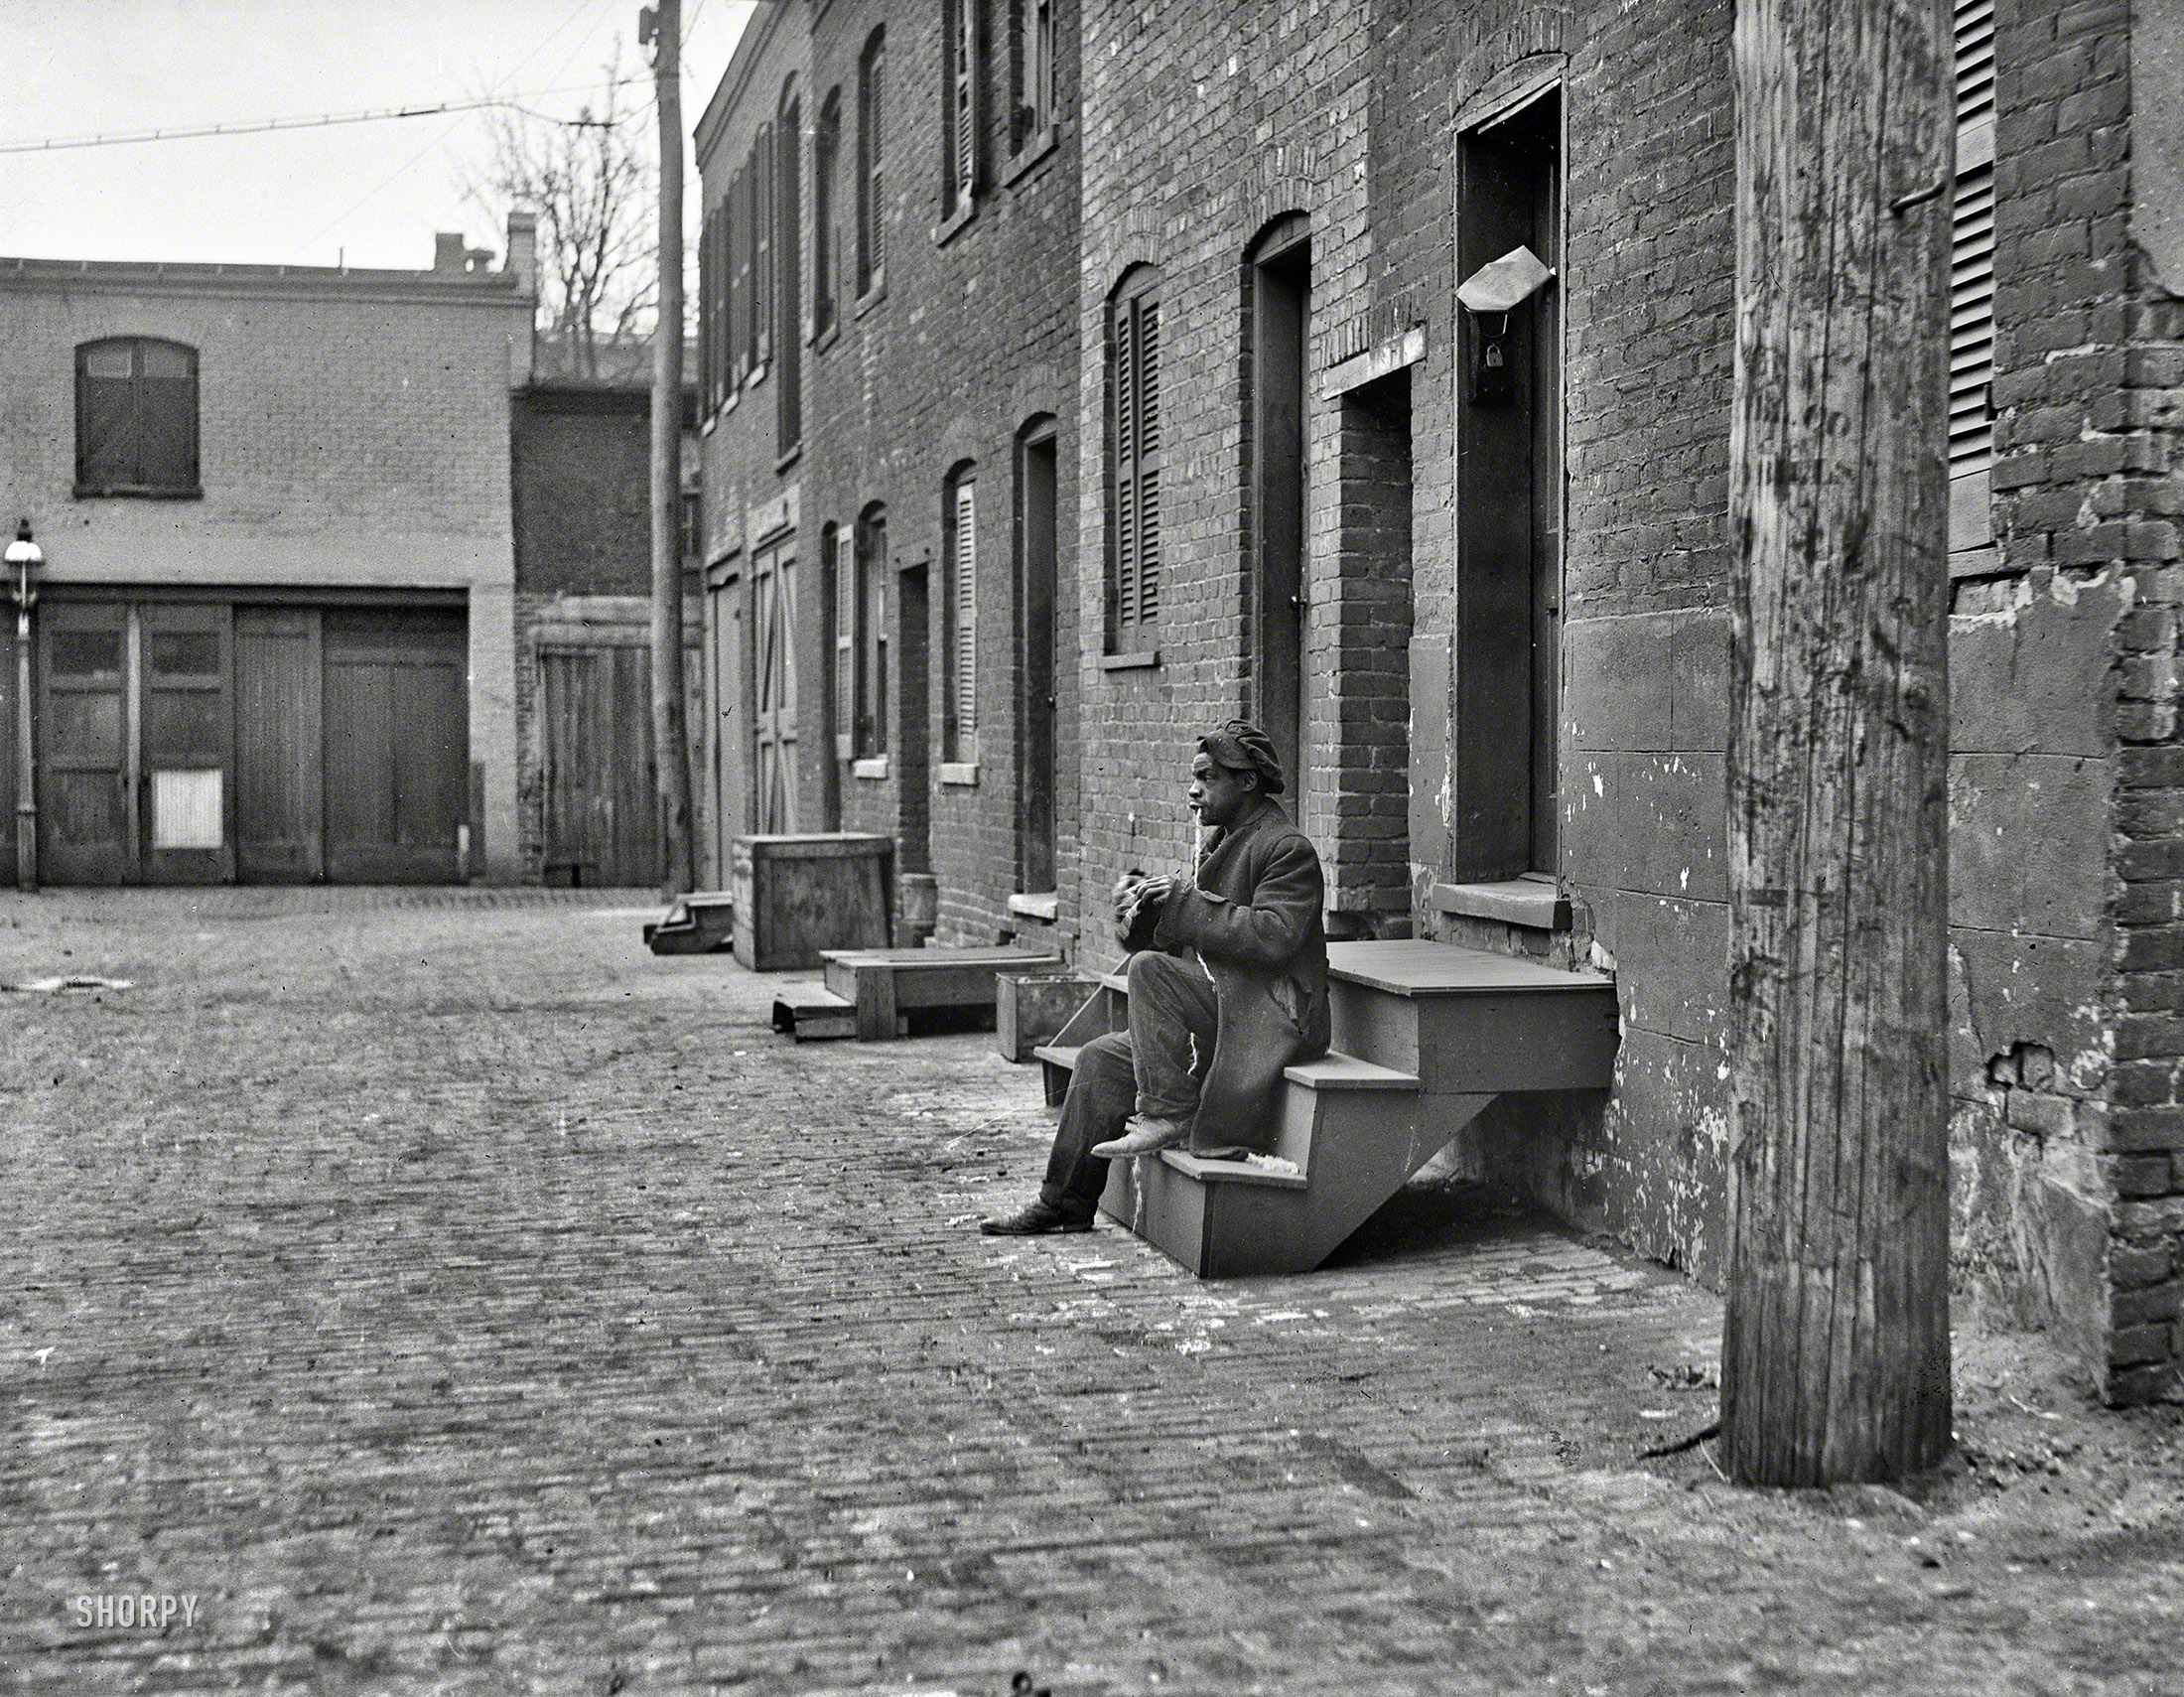 Update: This is the west side of Blagden Alley. Details in the comments here. "City rowhouses, 1923." Another view of back-alley Washington, D.C., and its long-forgotten habitues. Harris & Ewing glass negative. View full size.